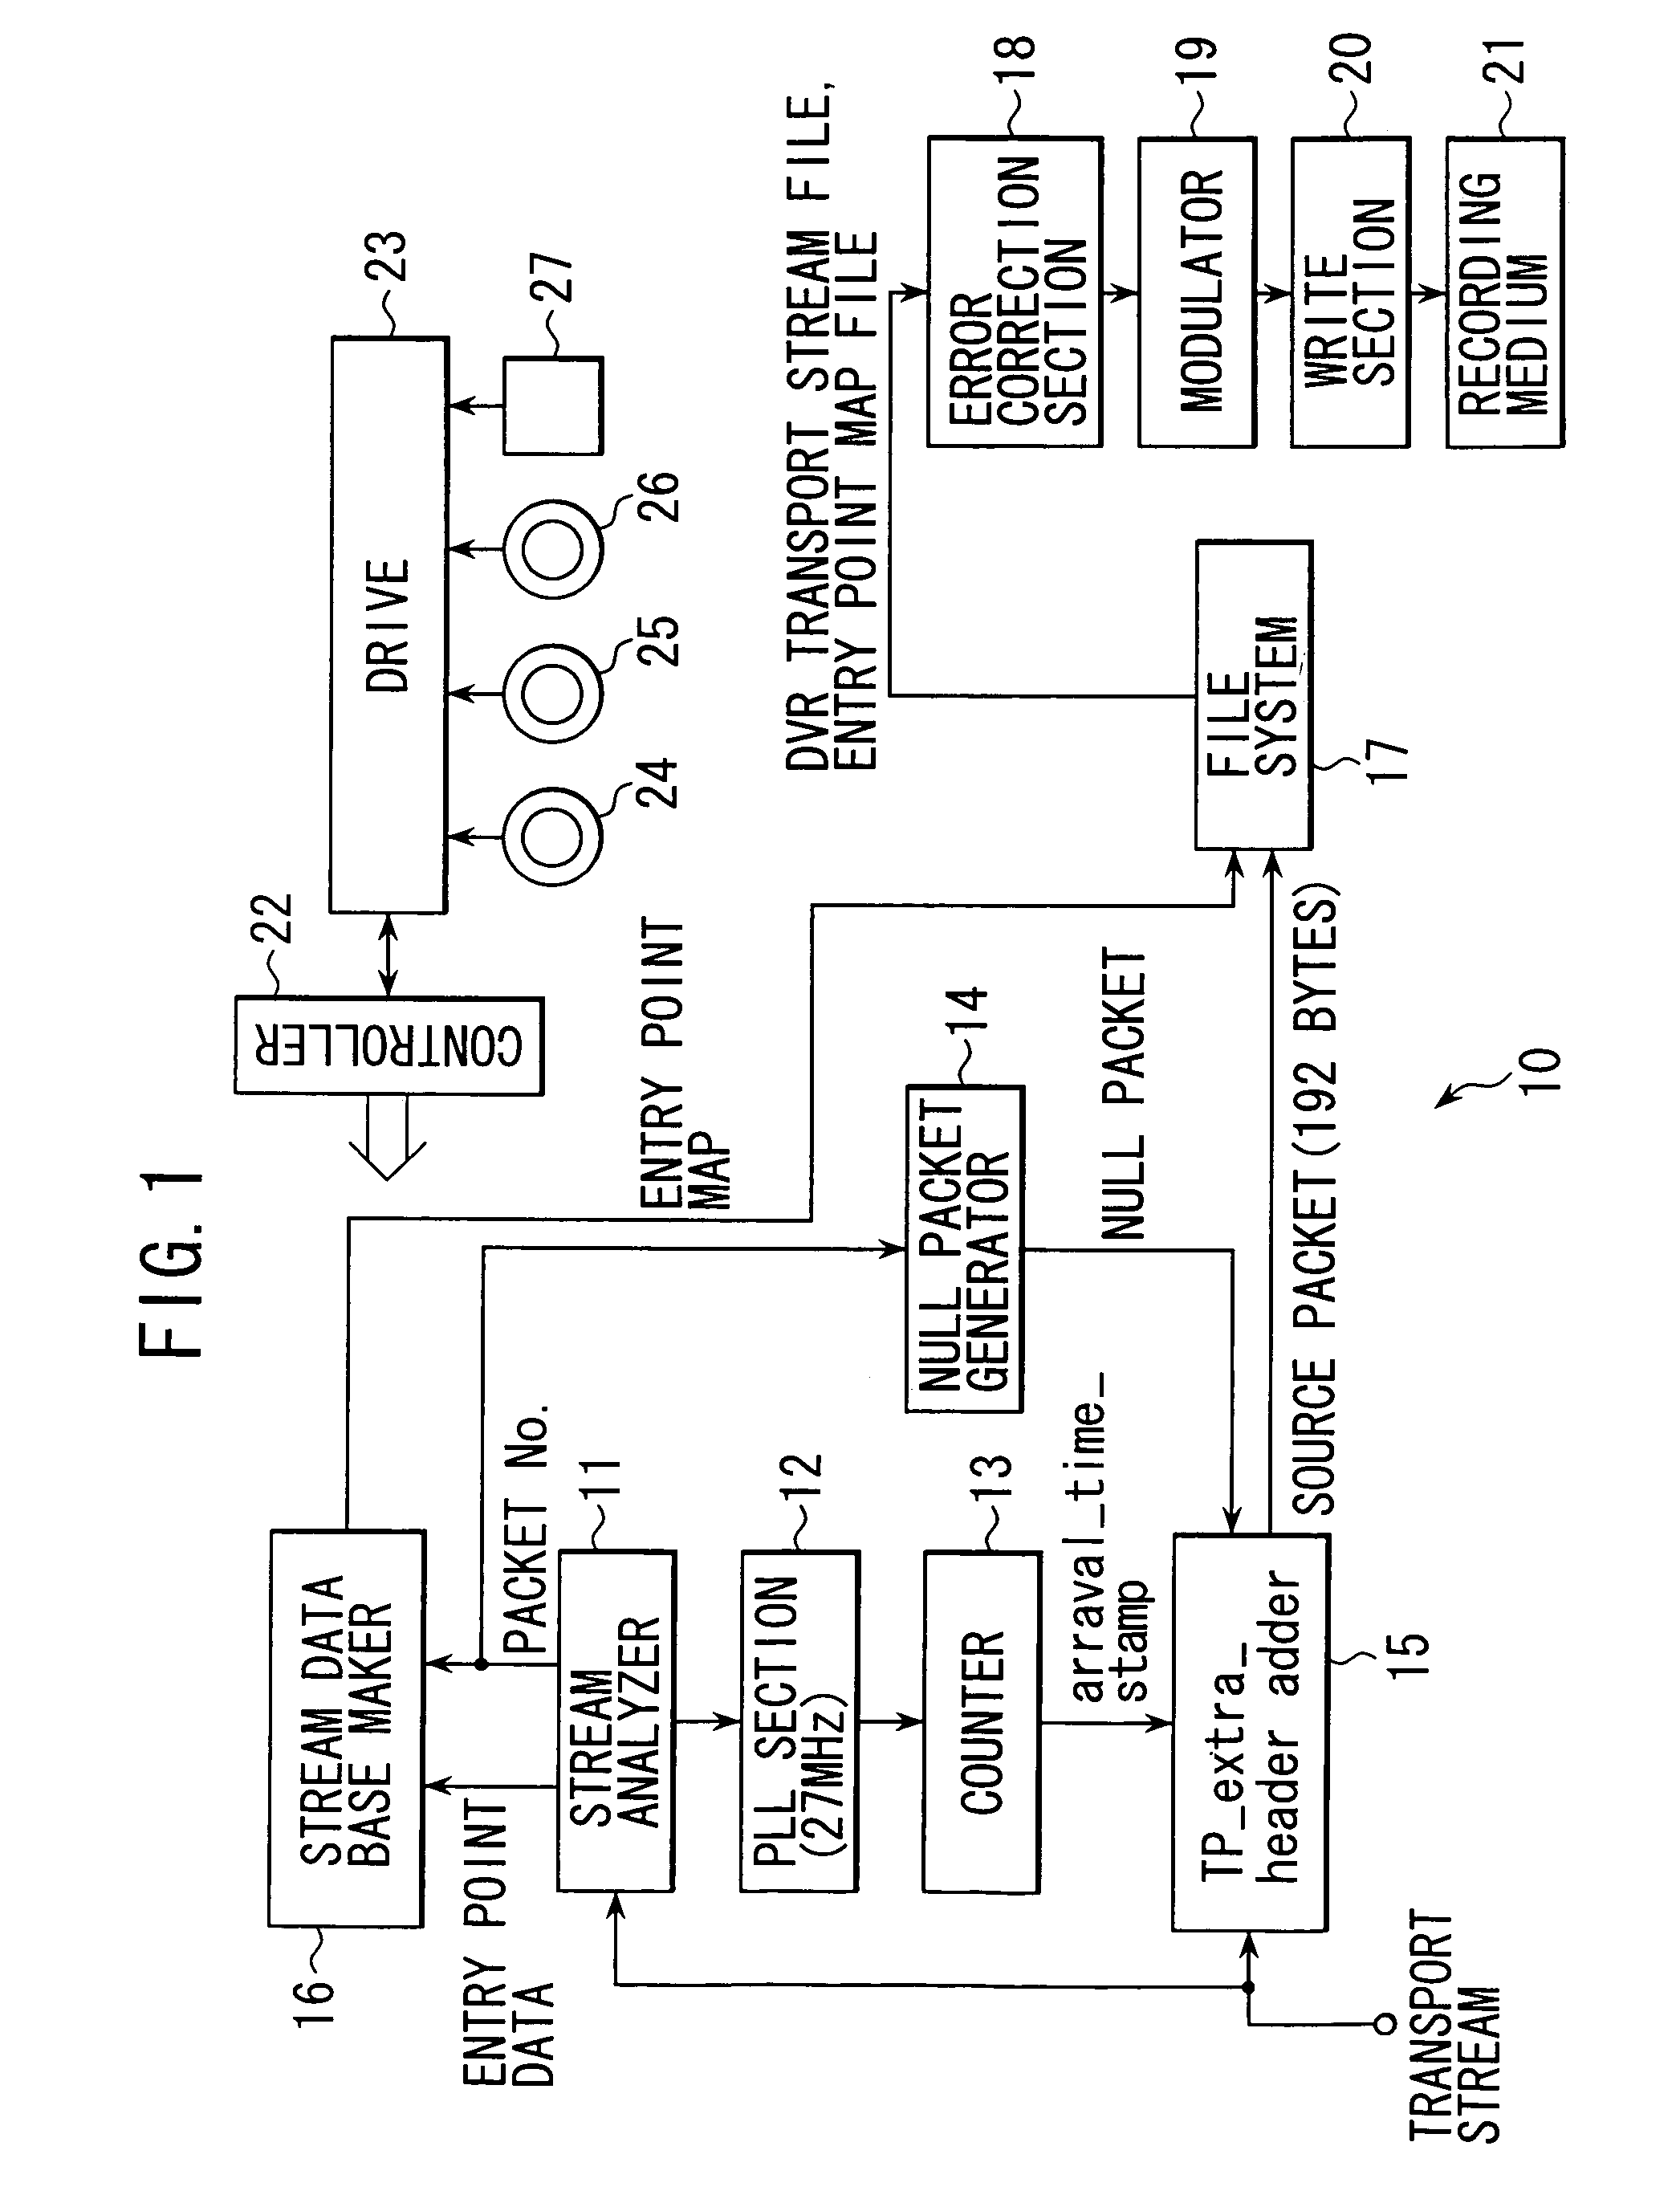 Transport stream processing device, and associated methodology of generating and aligning source data packets in a physical data structure